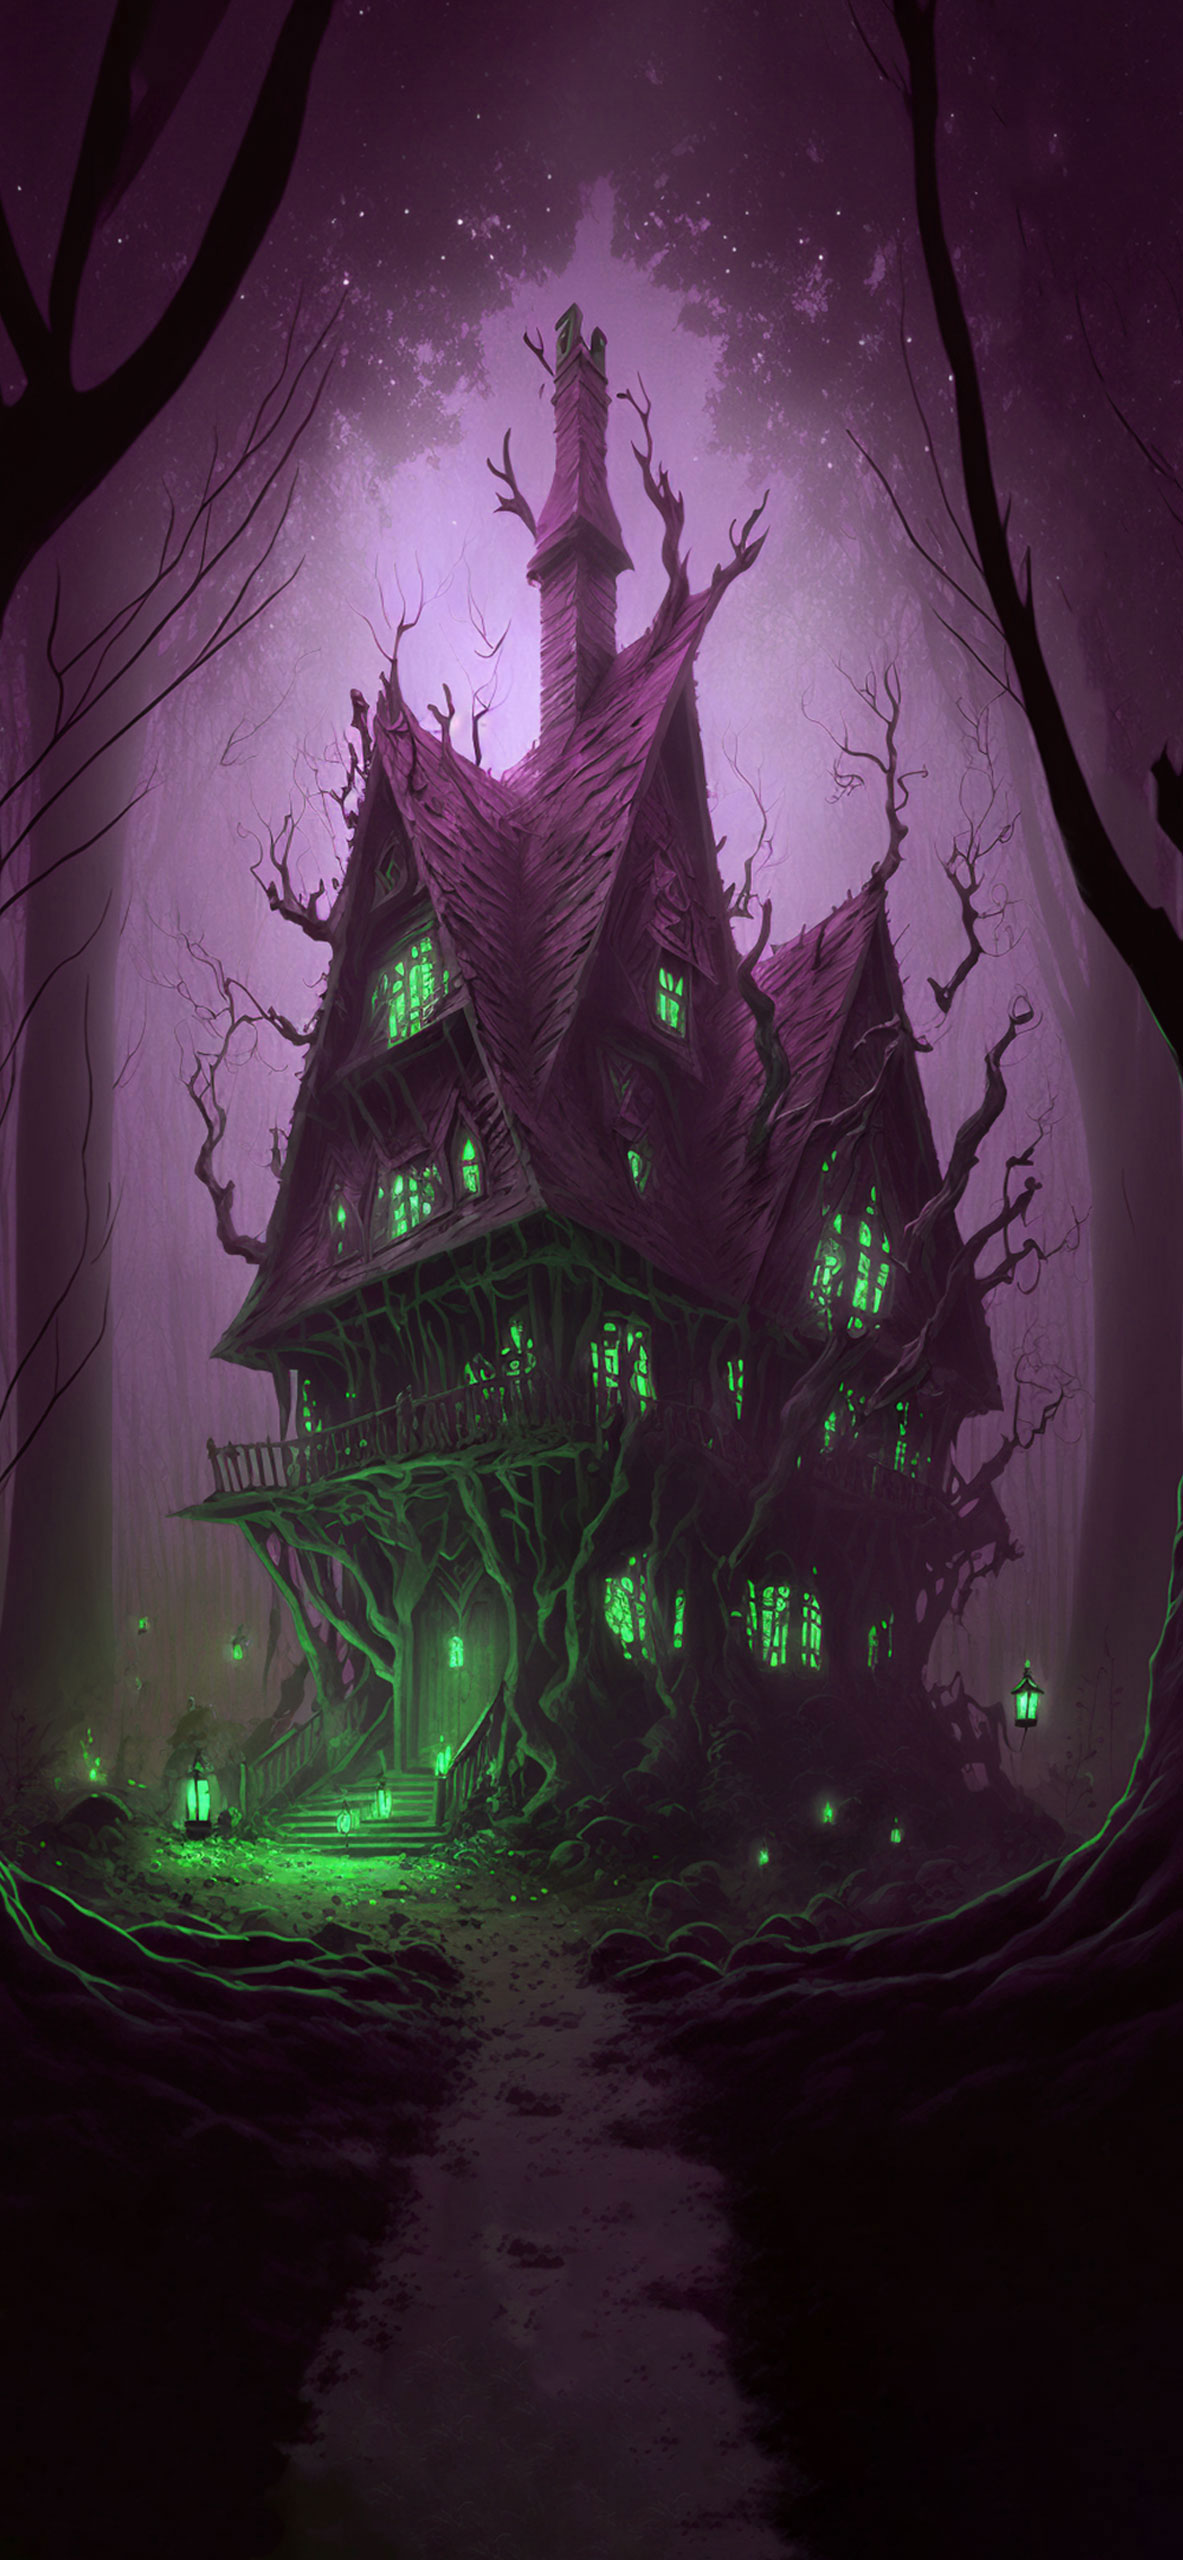 A haunted house in a forest with glowing windows - Magic